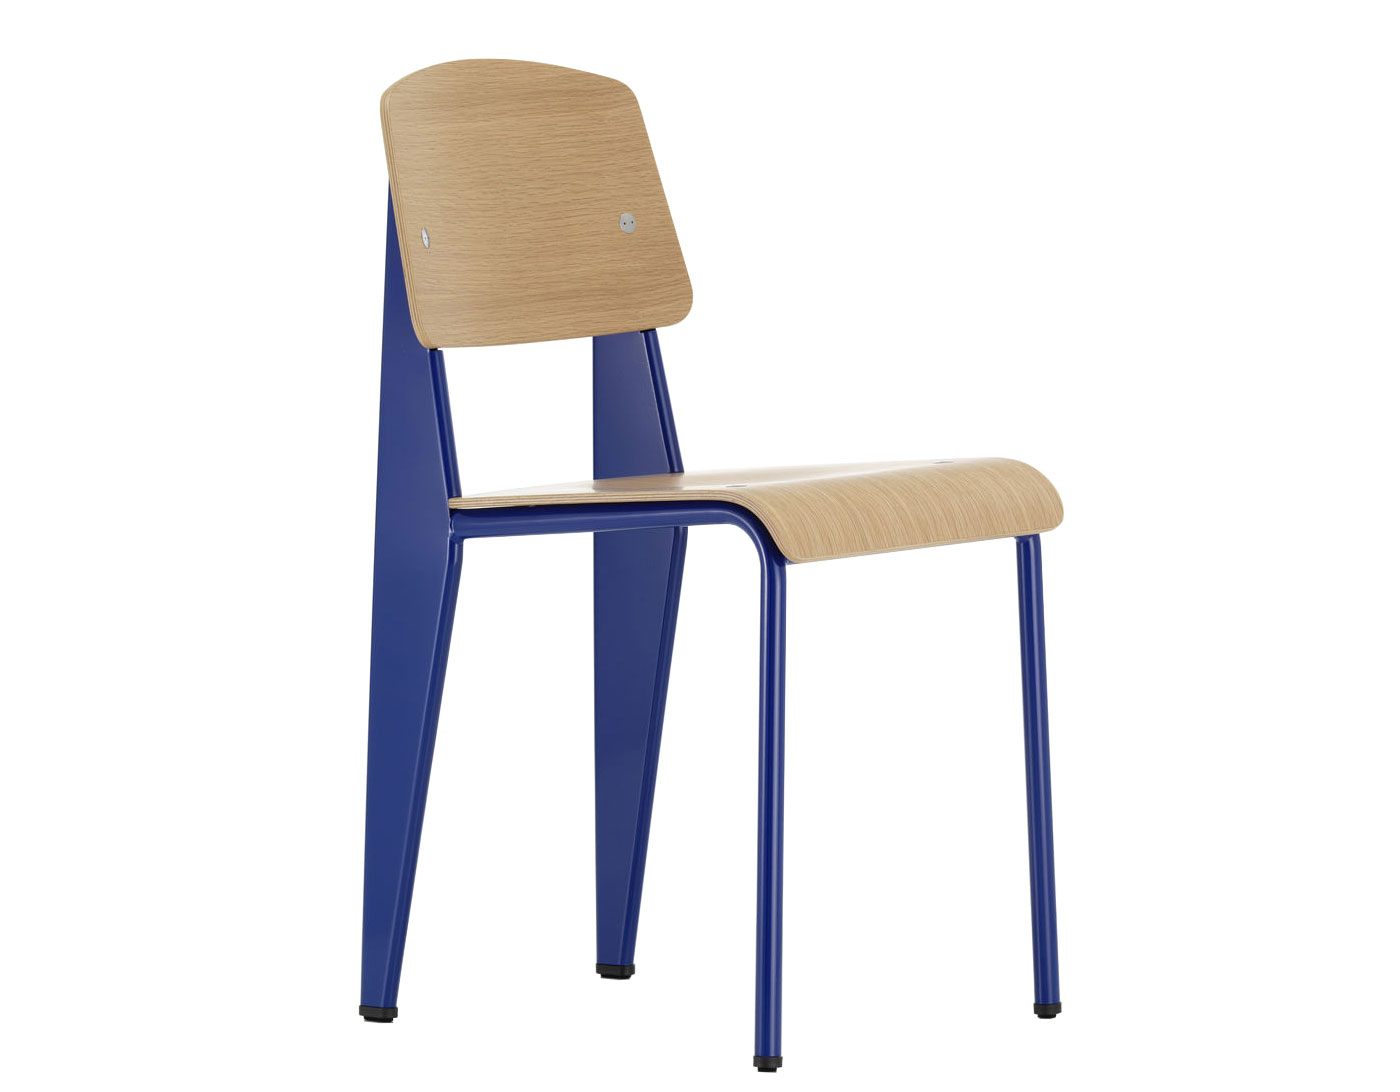 Jean Prouve Standard Chair produced by Vitra | hive